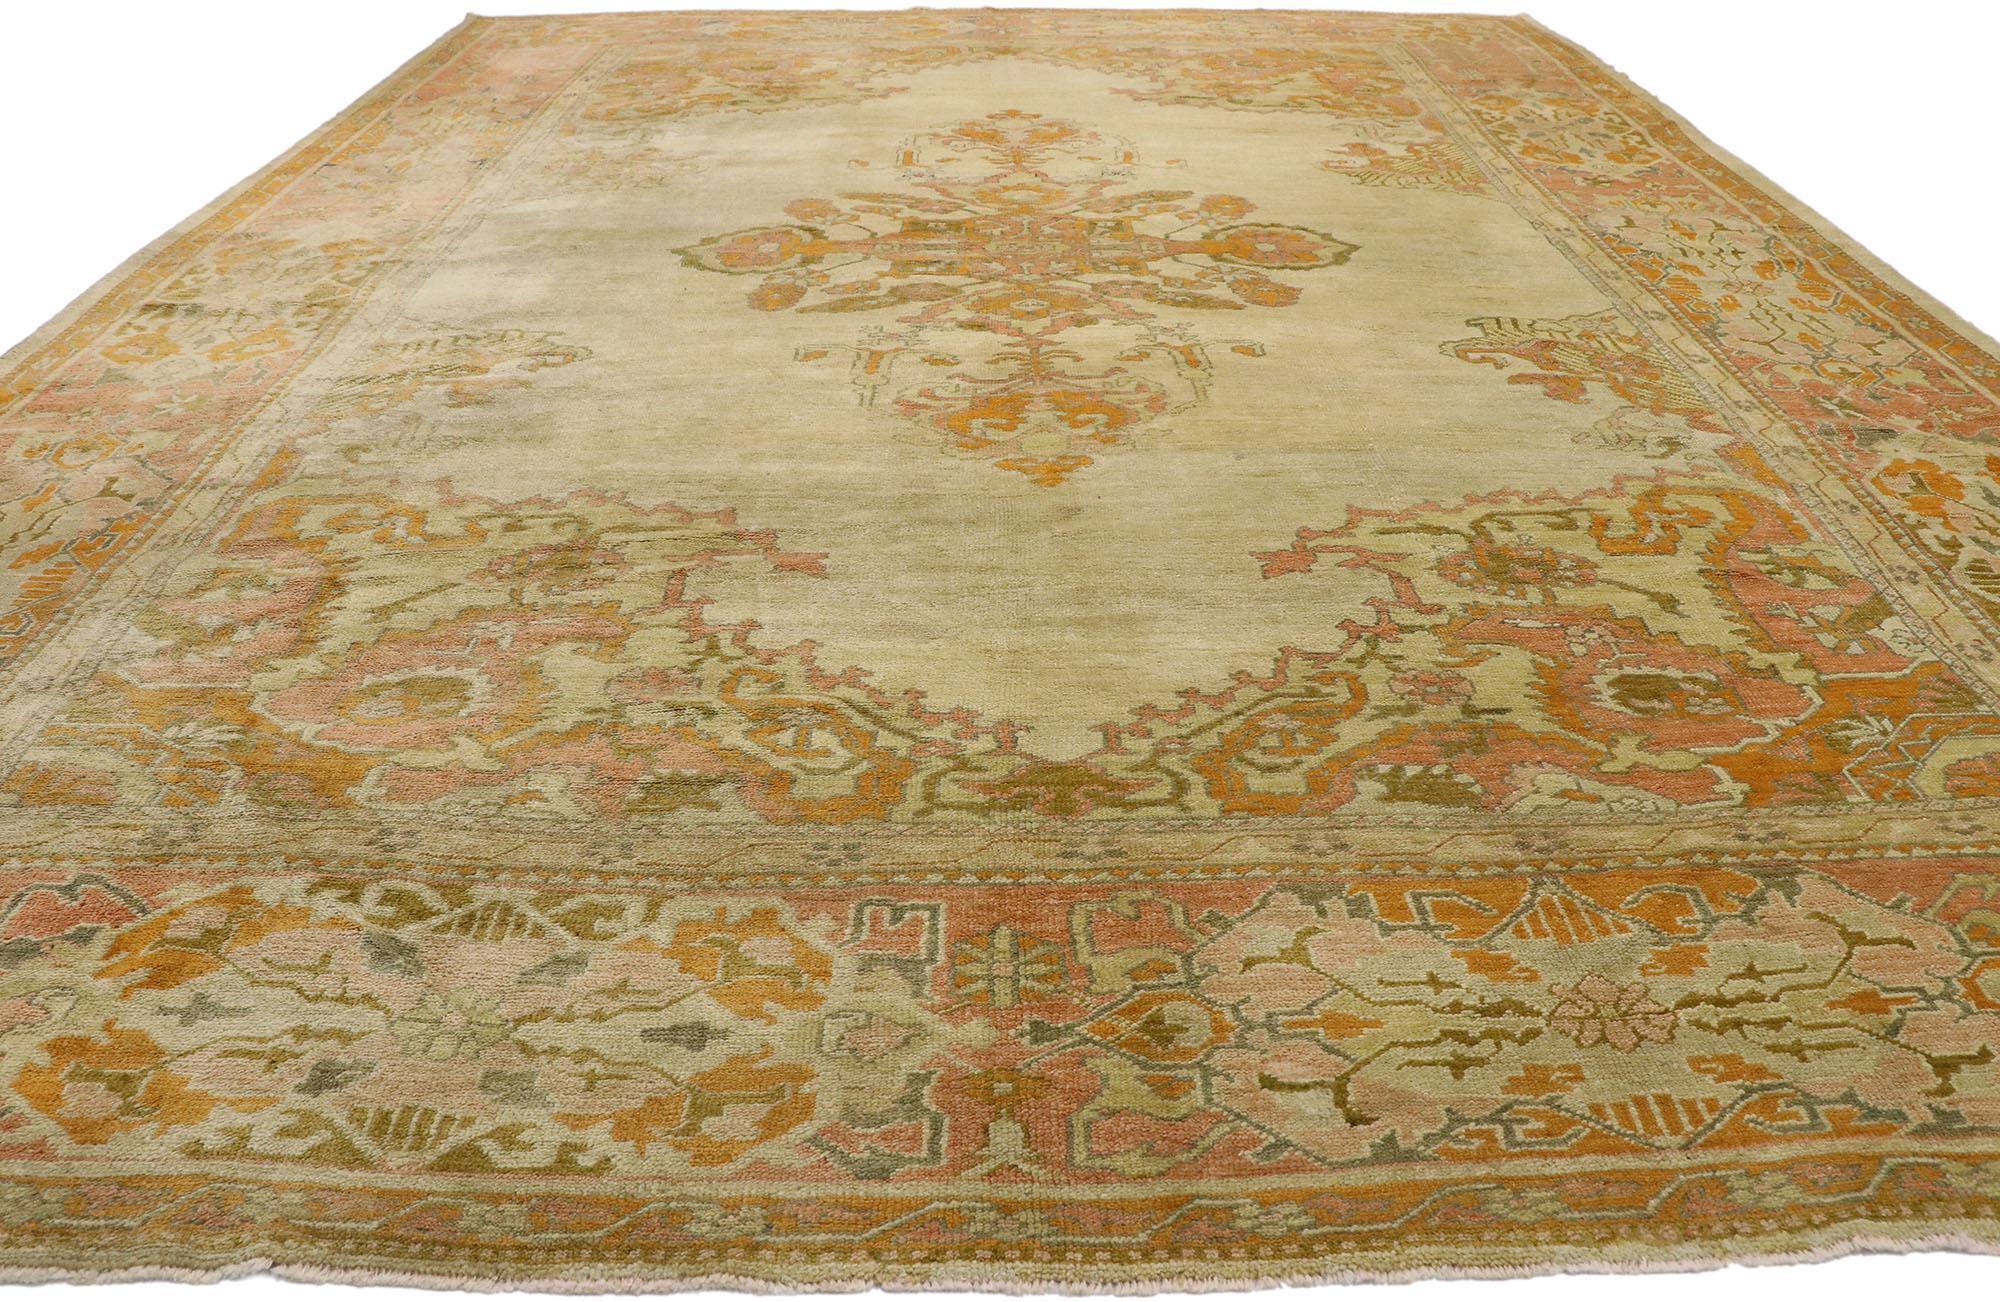 Modern Distressed Antique Turkish Oushak Rug with Rustic Arts & Crafts Style For Sale